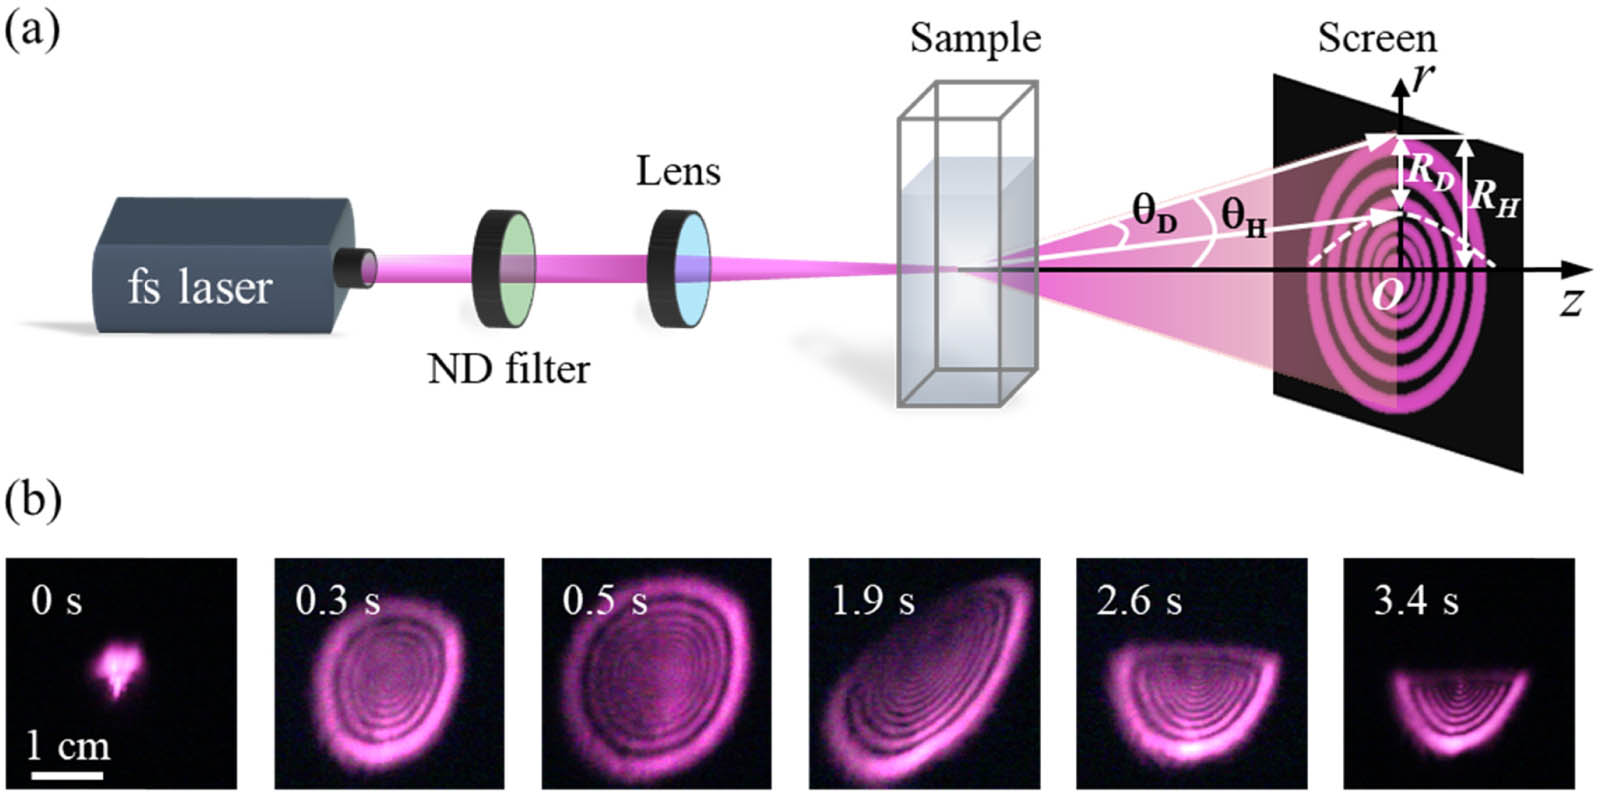 (a) Schematic of the experimental setup and (b) evolution of the concentric ring-shaped diffraction patterns excited by a fs pulse laser at λ=800 nm. The time capturing the diffraction patterns is inserted at the upper-left corner of each image.